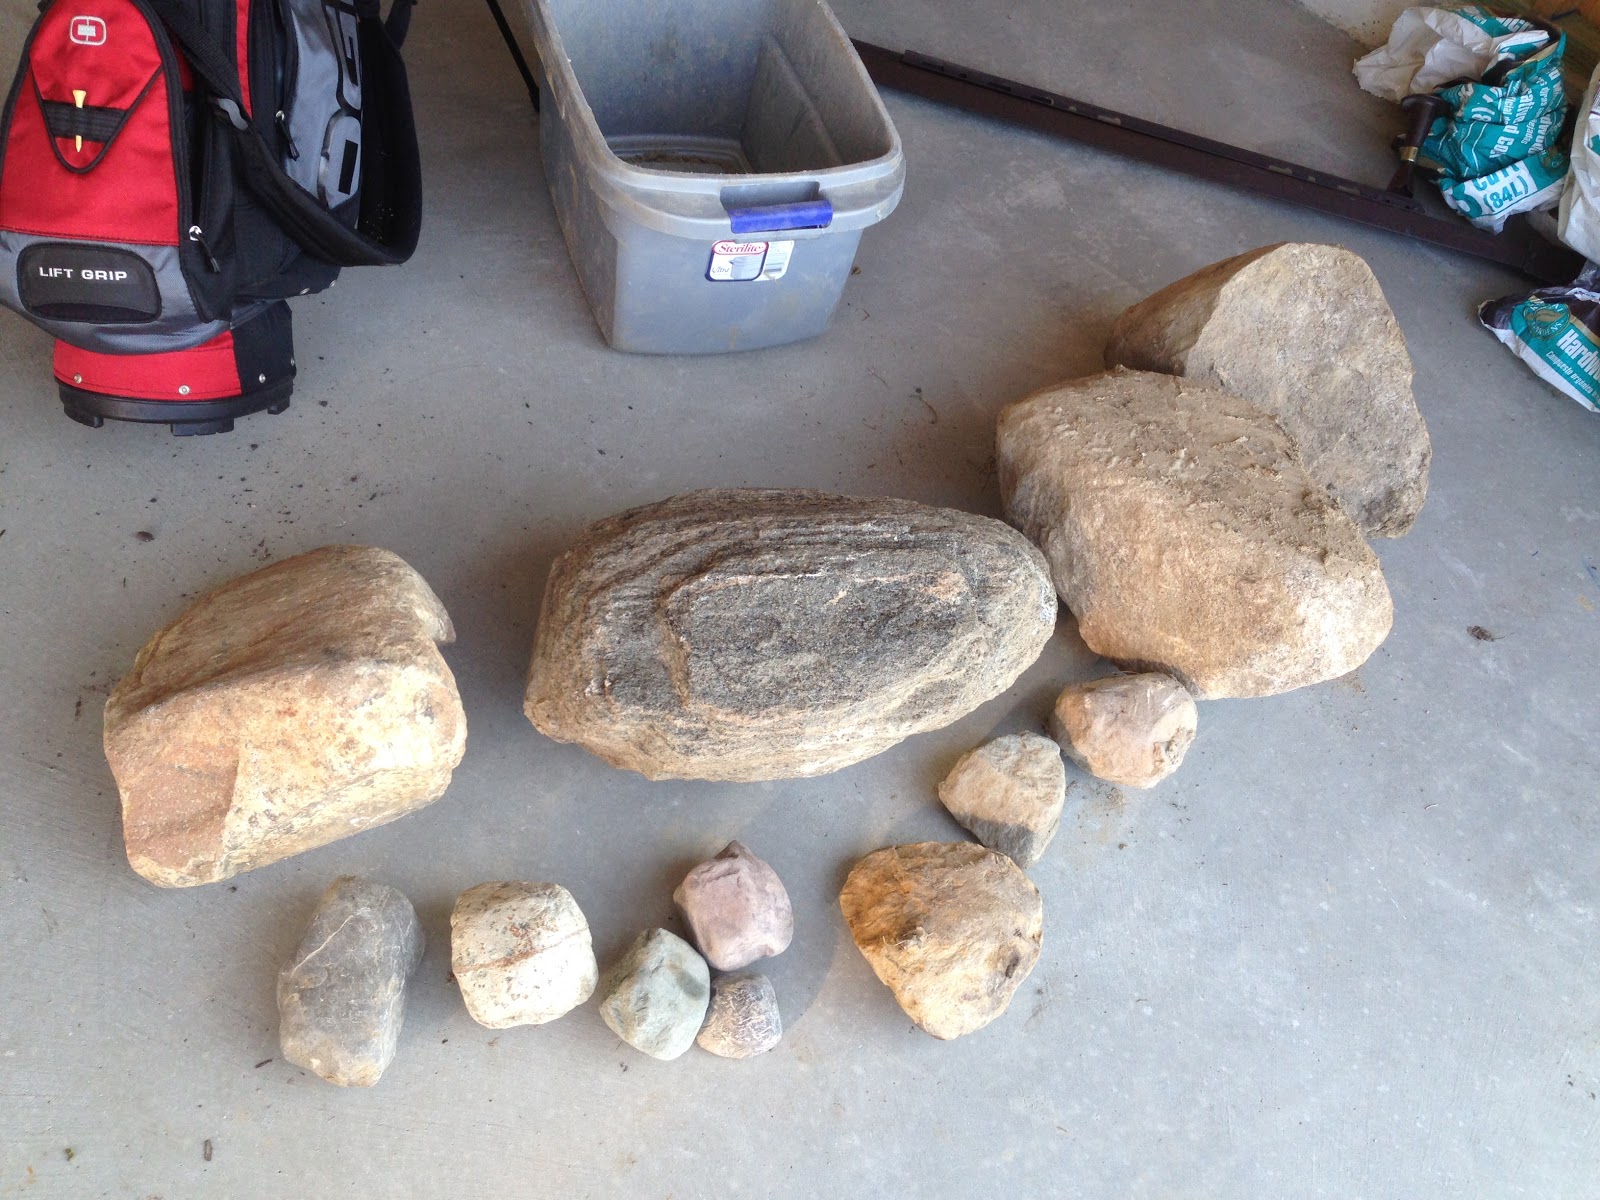 rock collection in garage